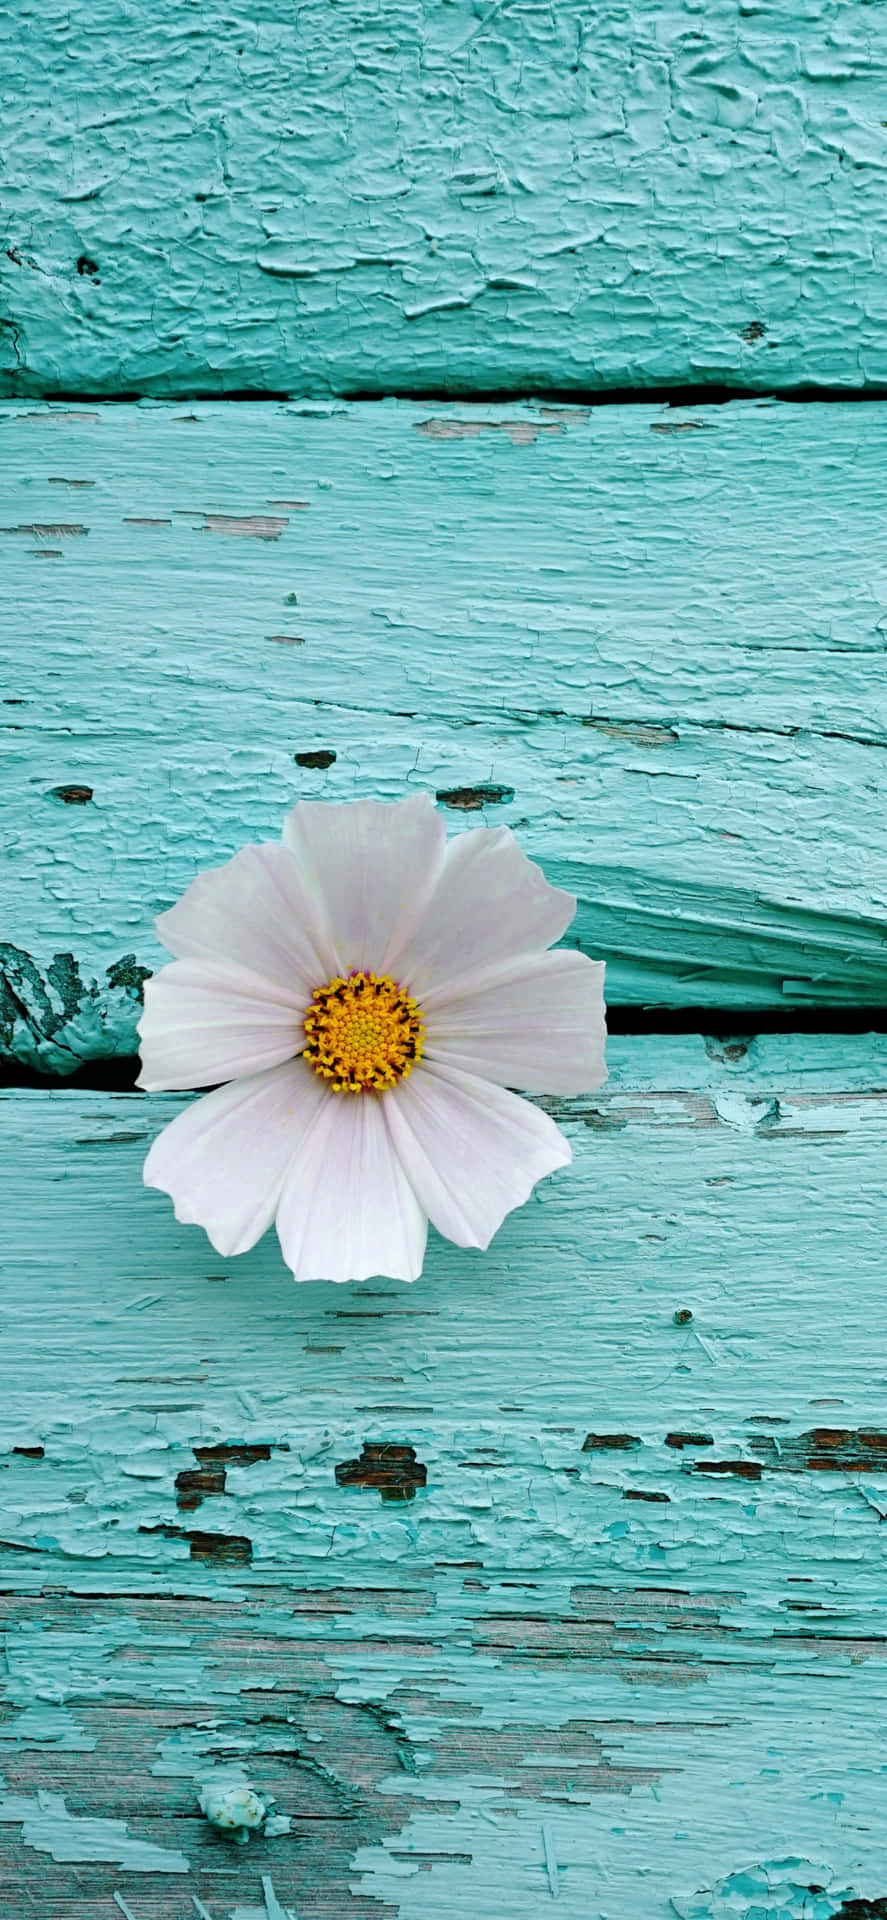 A White Flower On A Turquoise Wooden Surface